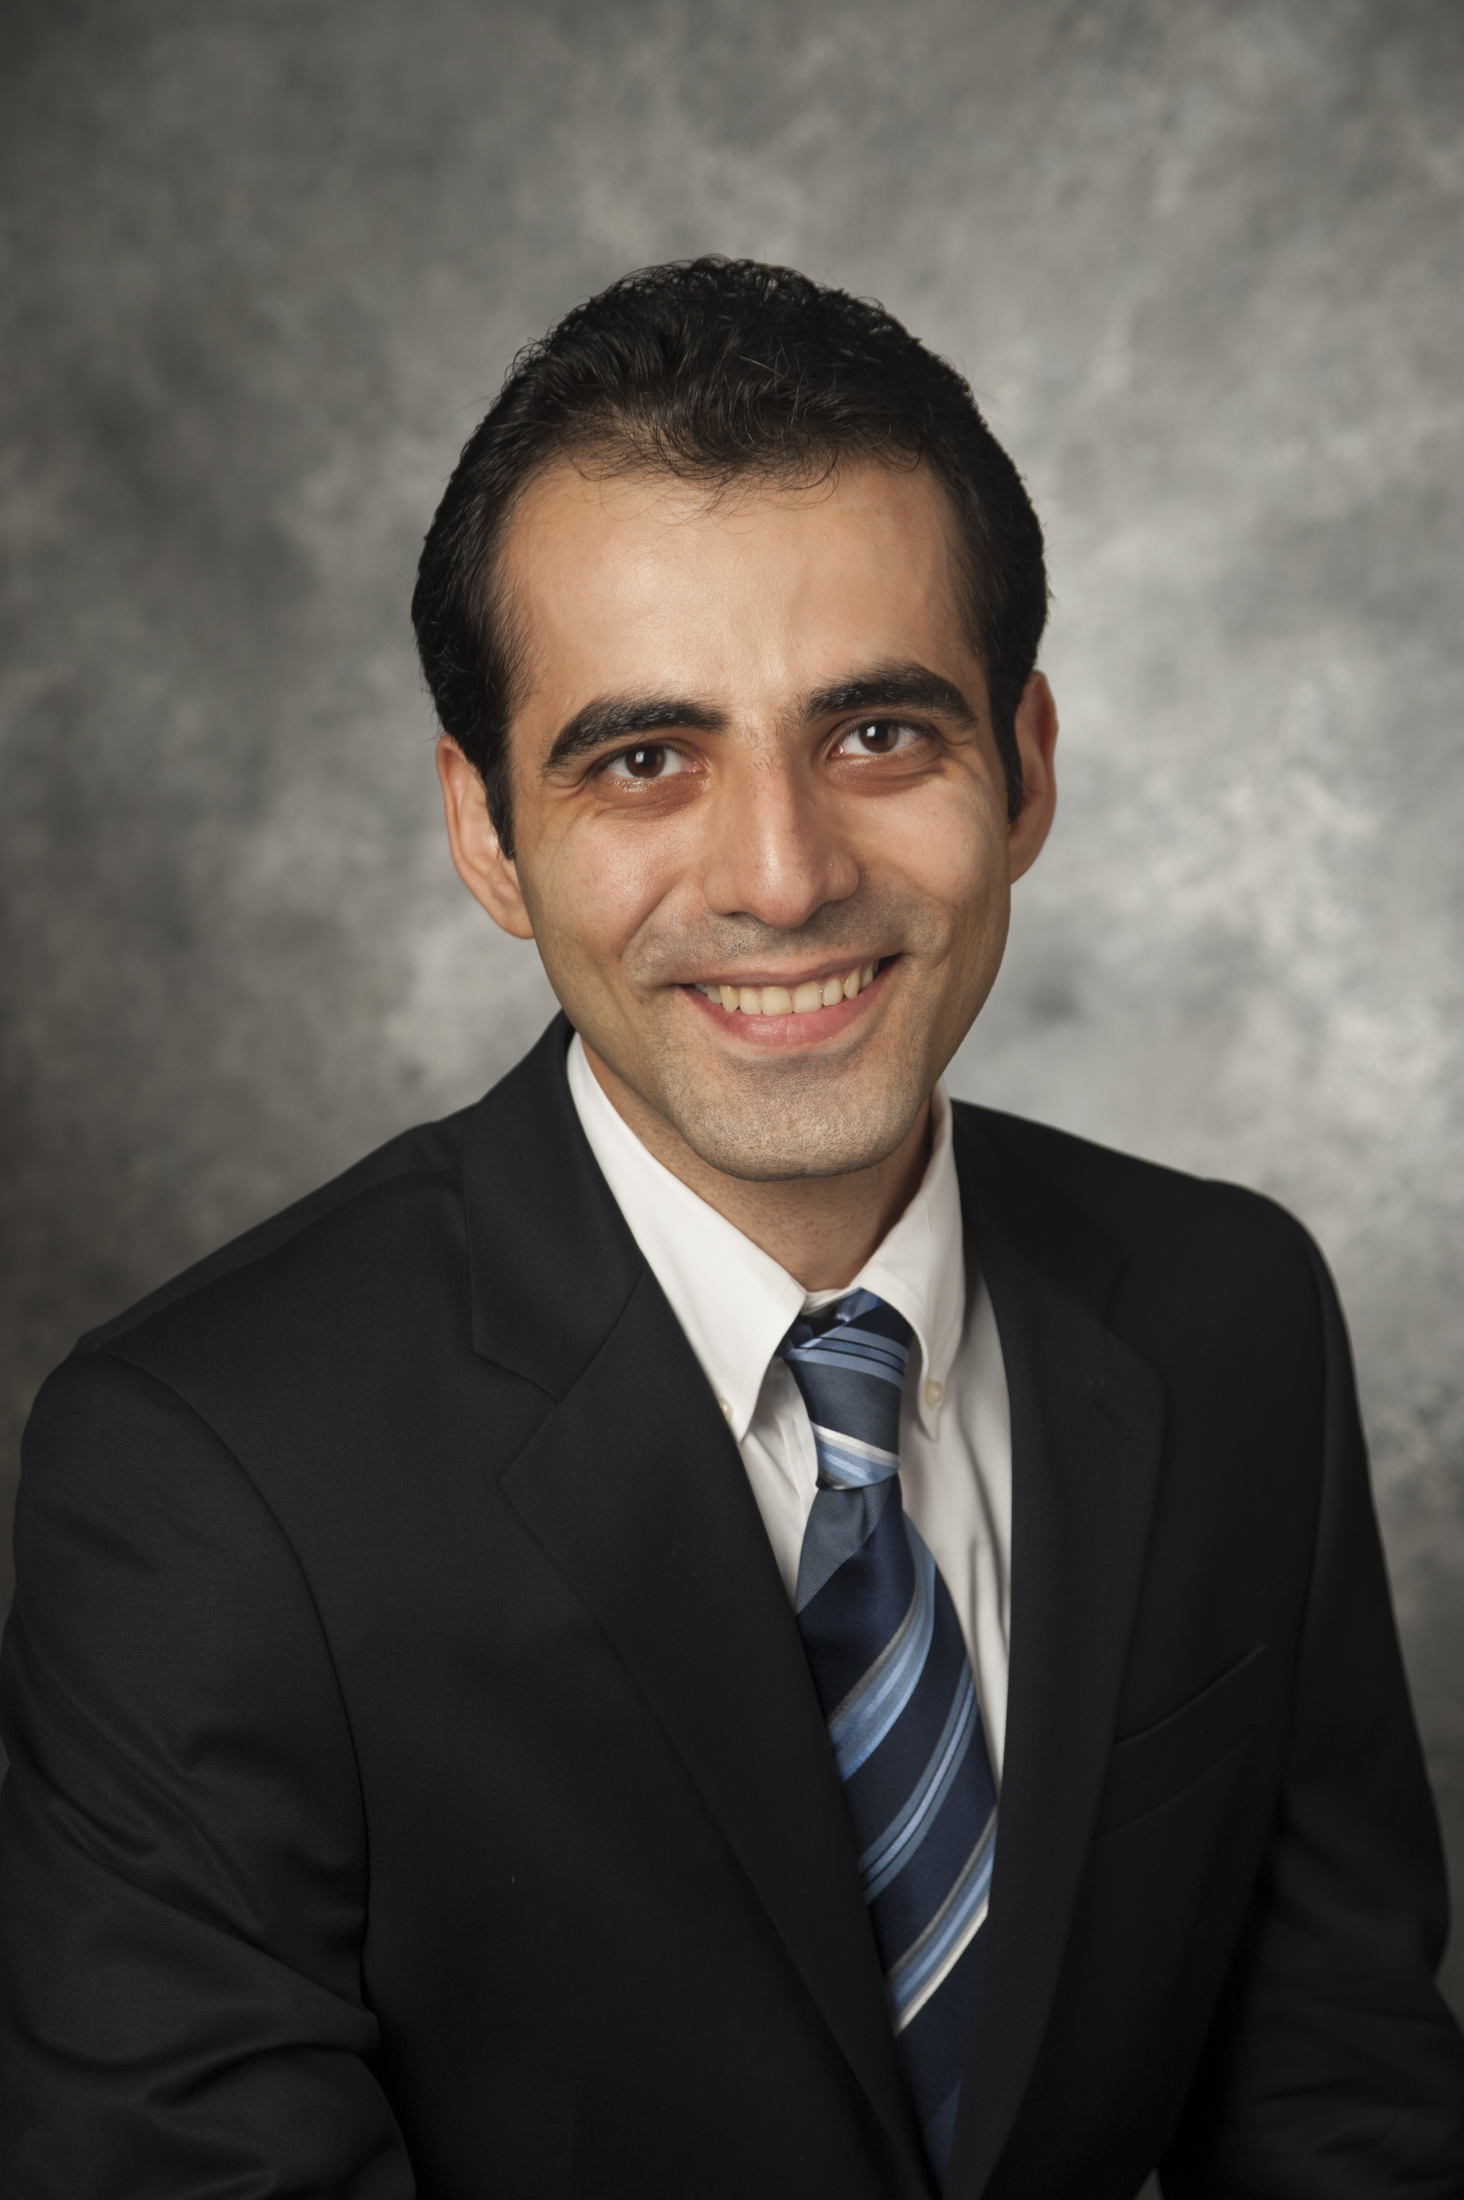 A headshot of Mohammad Khodayar, a member of the Lyle School of Engineering Faculty.